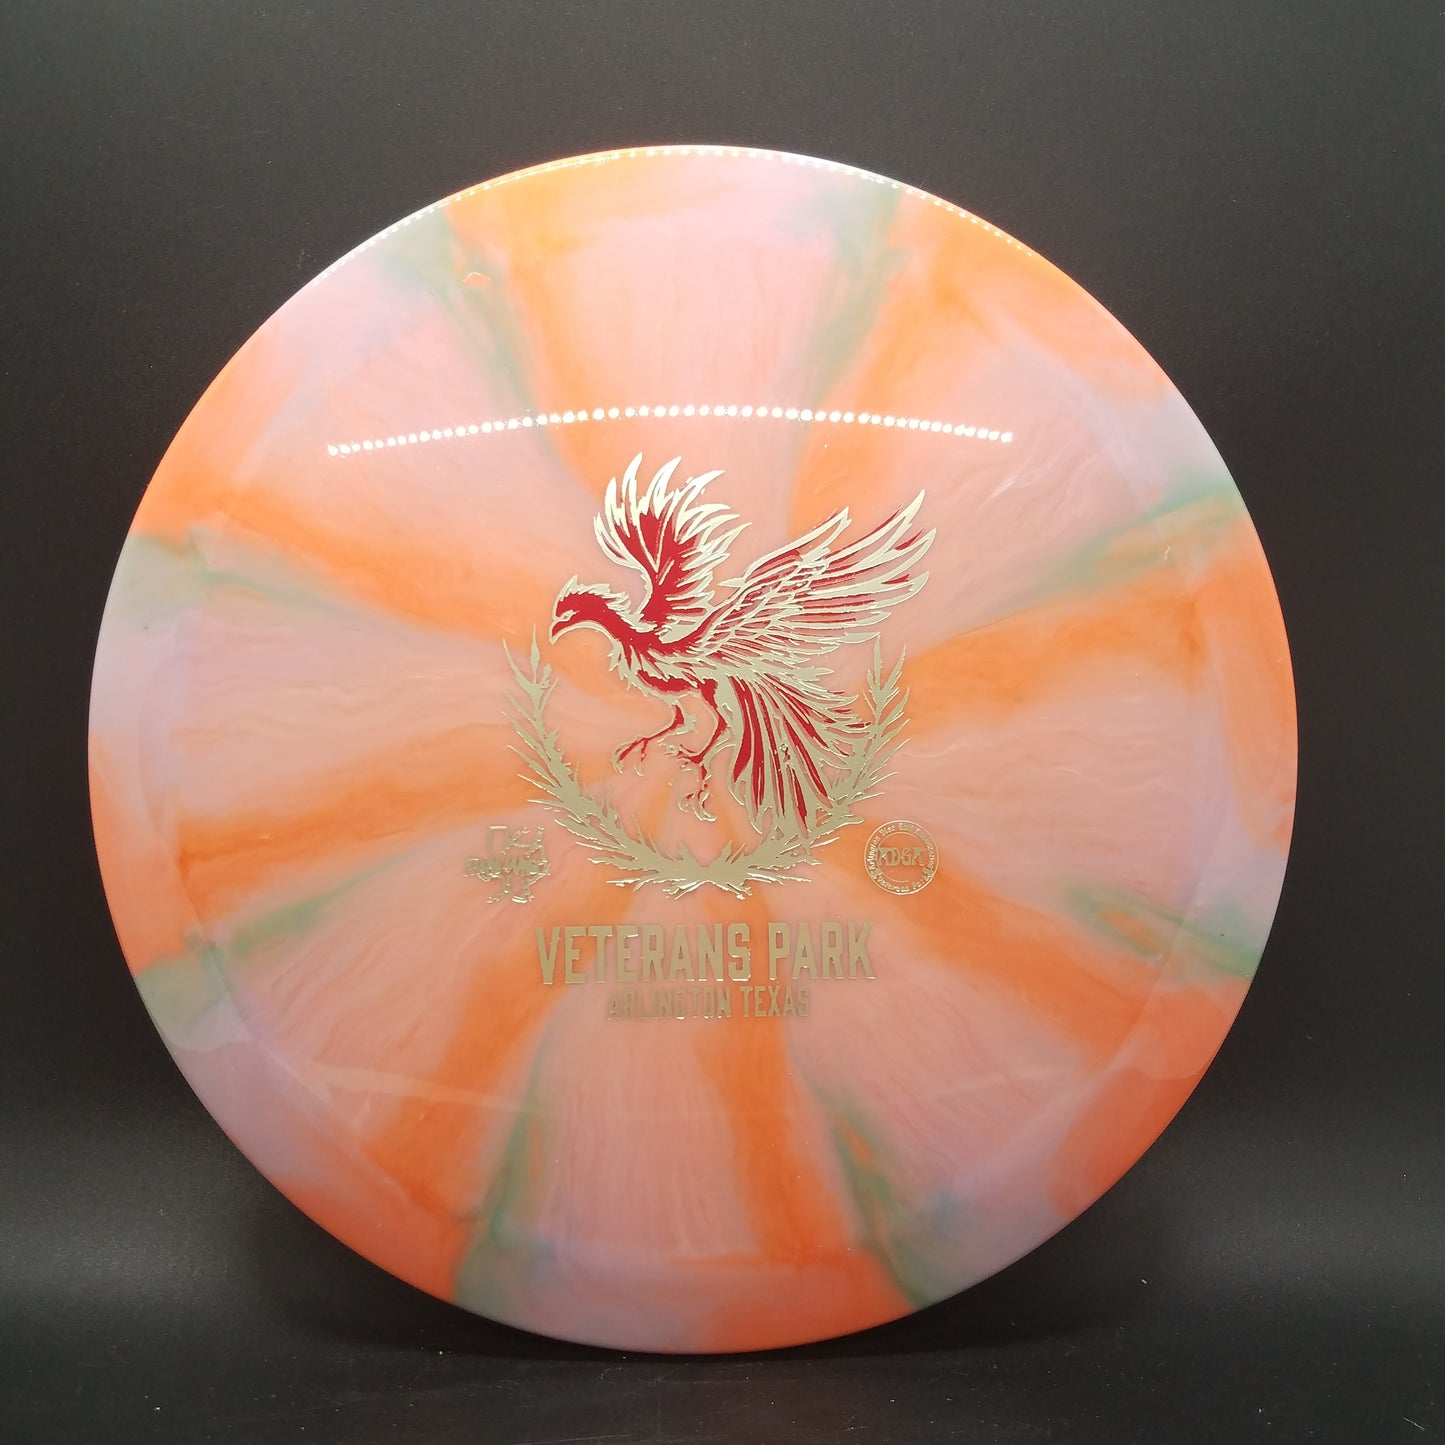 Mint VPO Apex Phoenix pink with red/silver stamp 175g